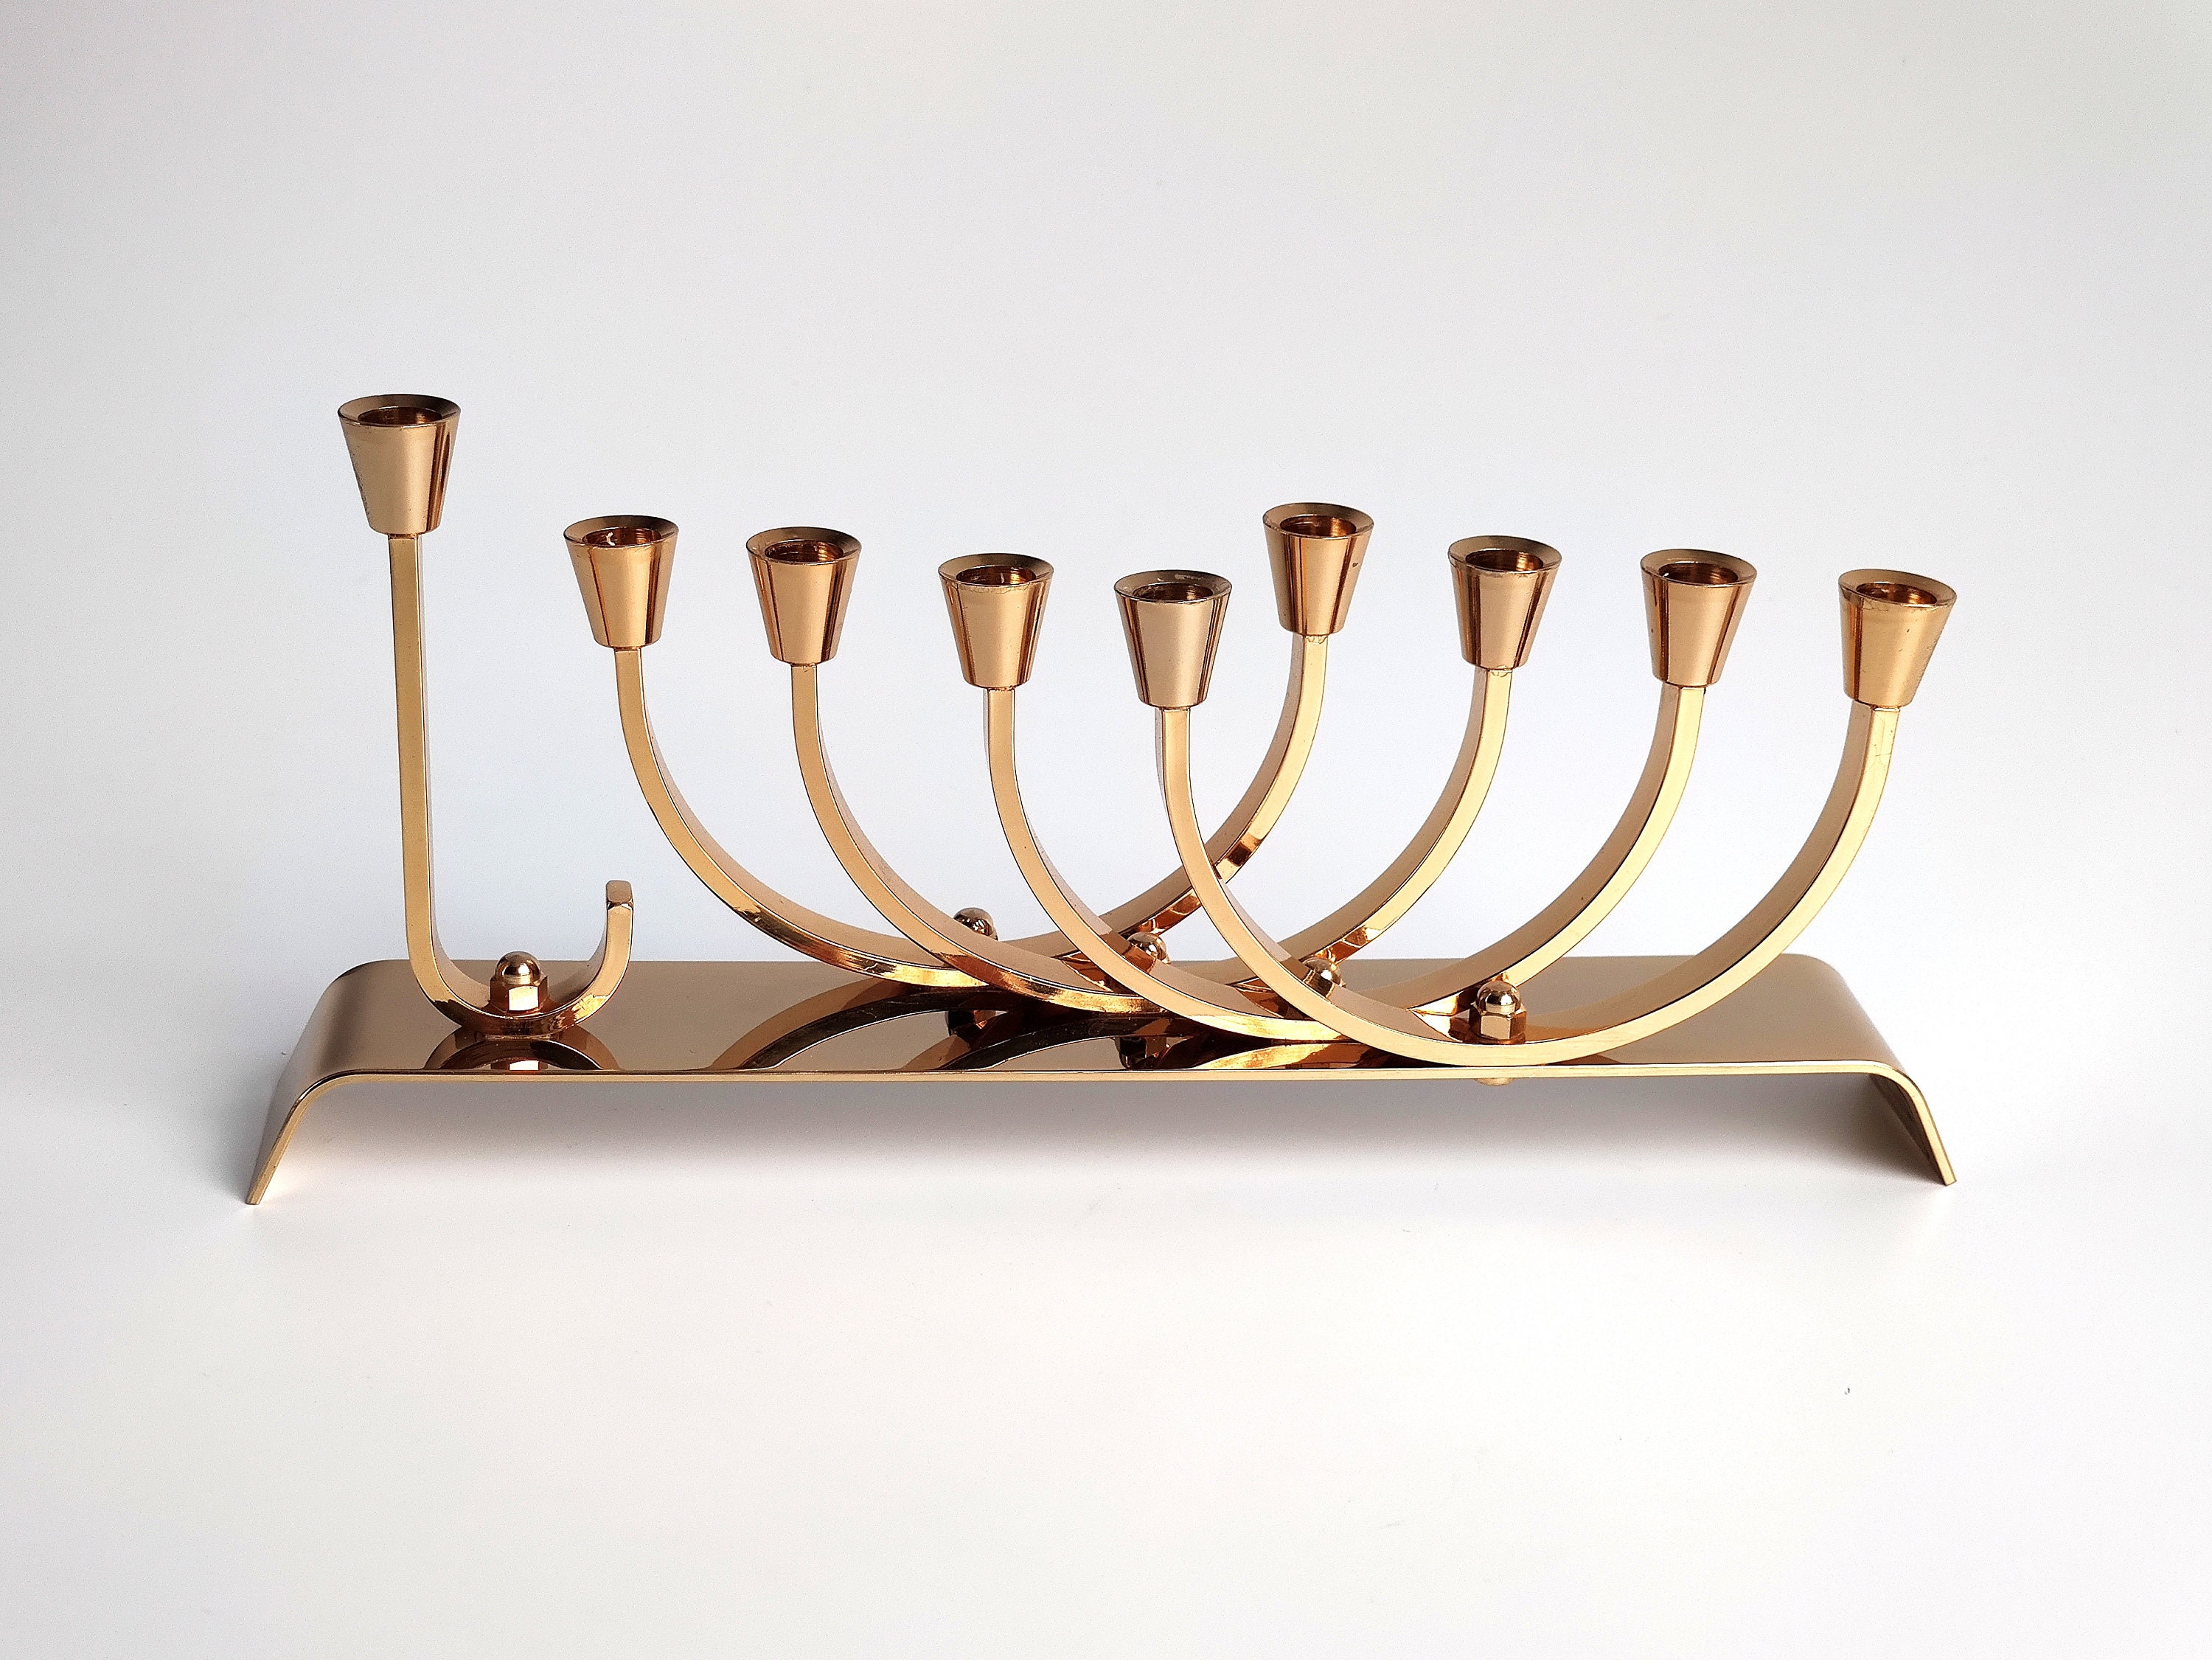 Set of 9 Brass-Plated Menorah Candle Cups with Screws